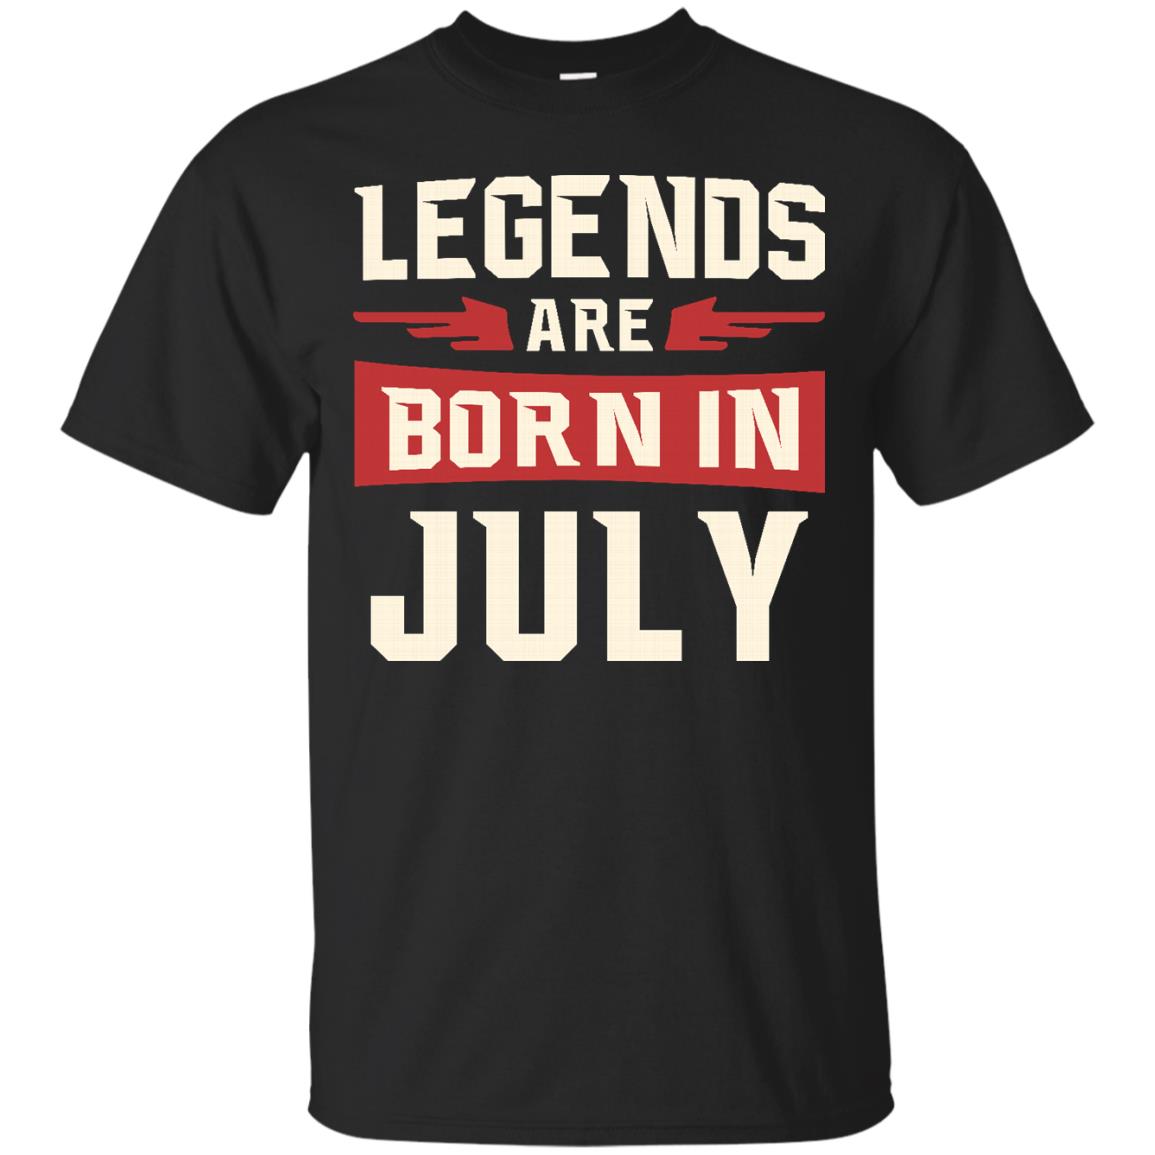 Jason Statham: legends are born in July shirt, hoodie